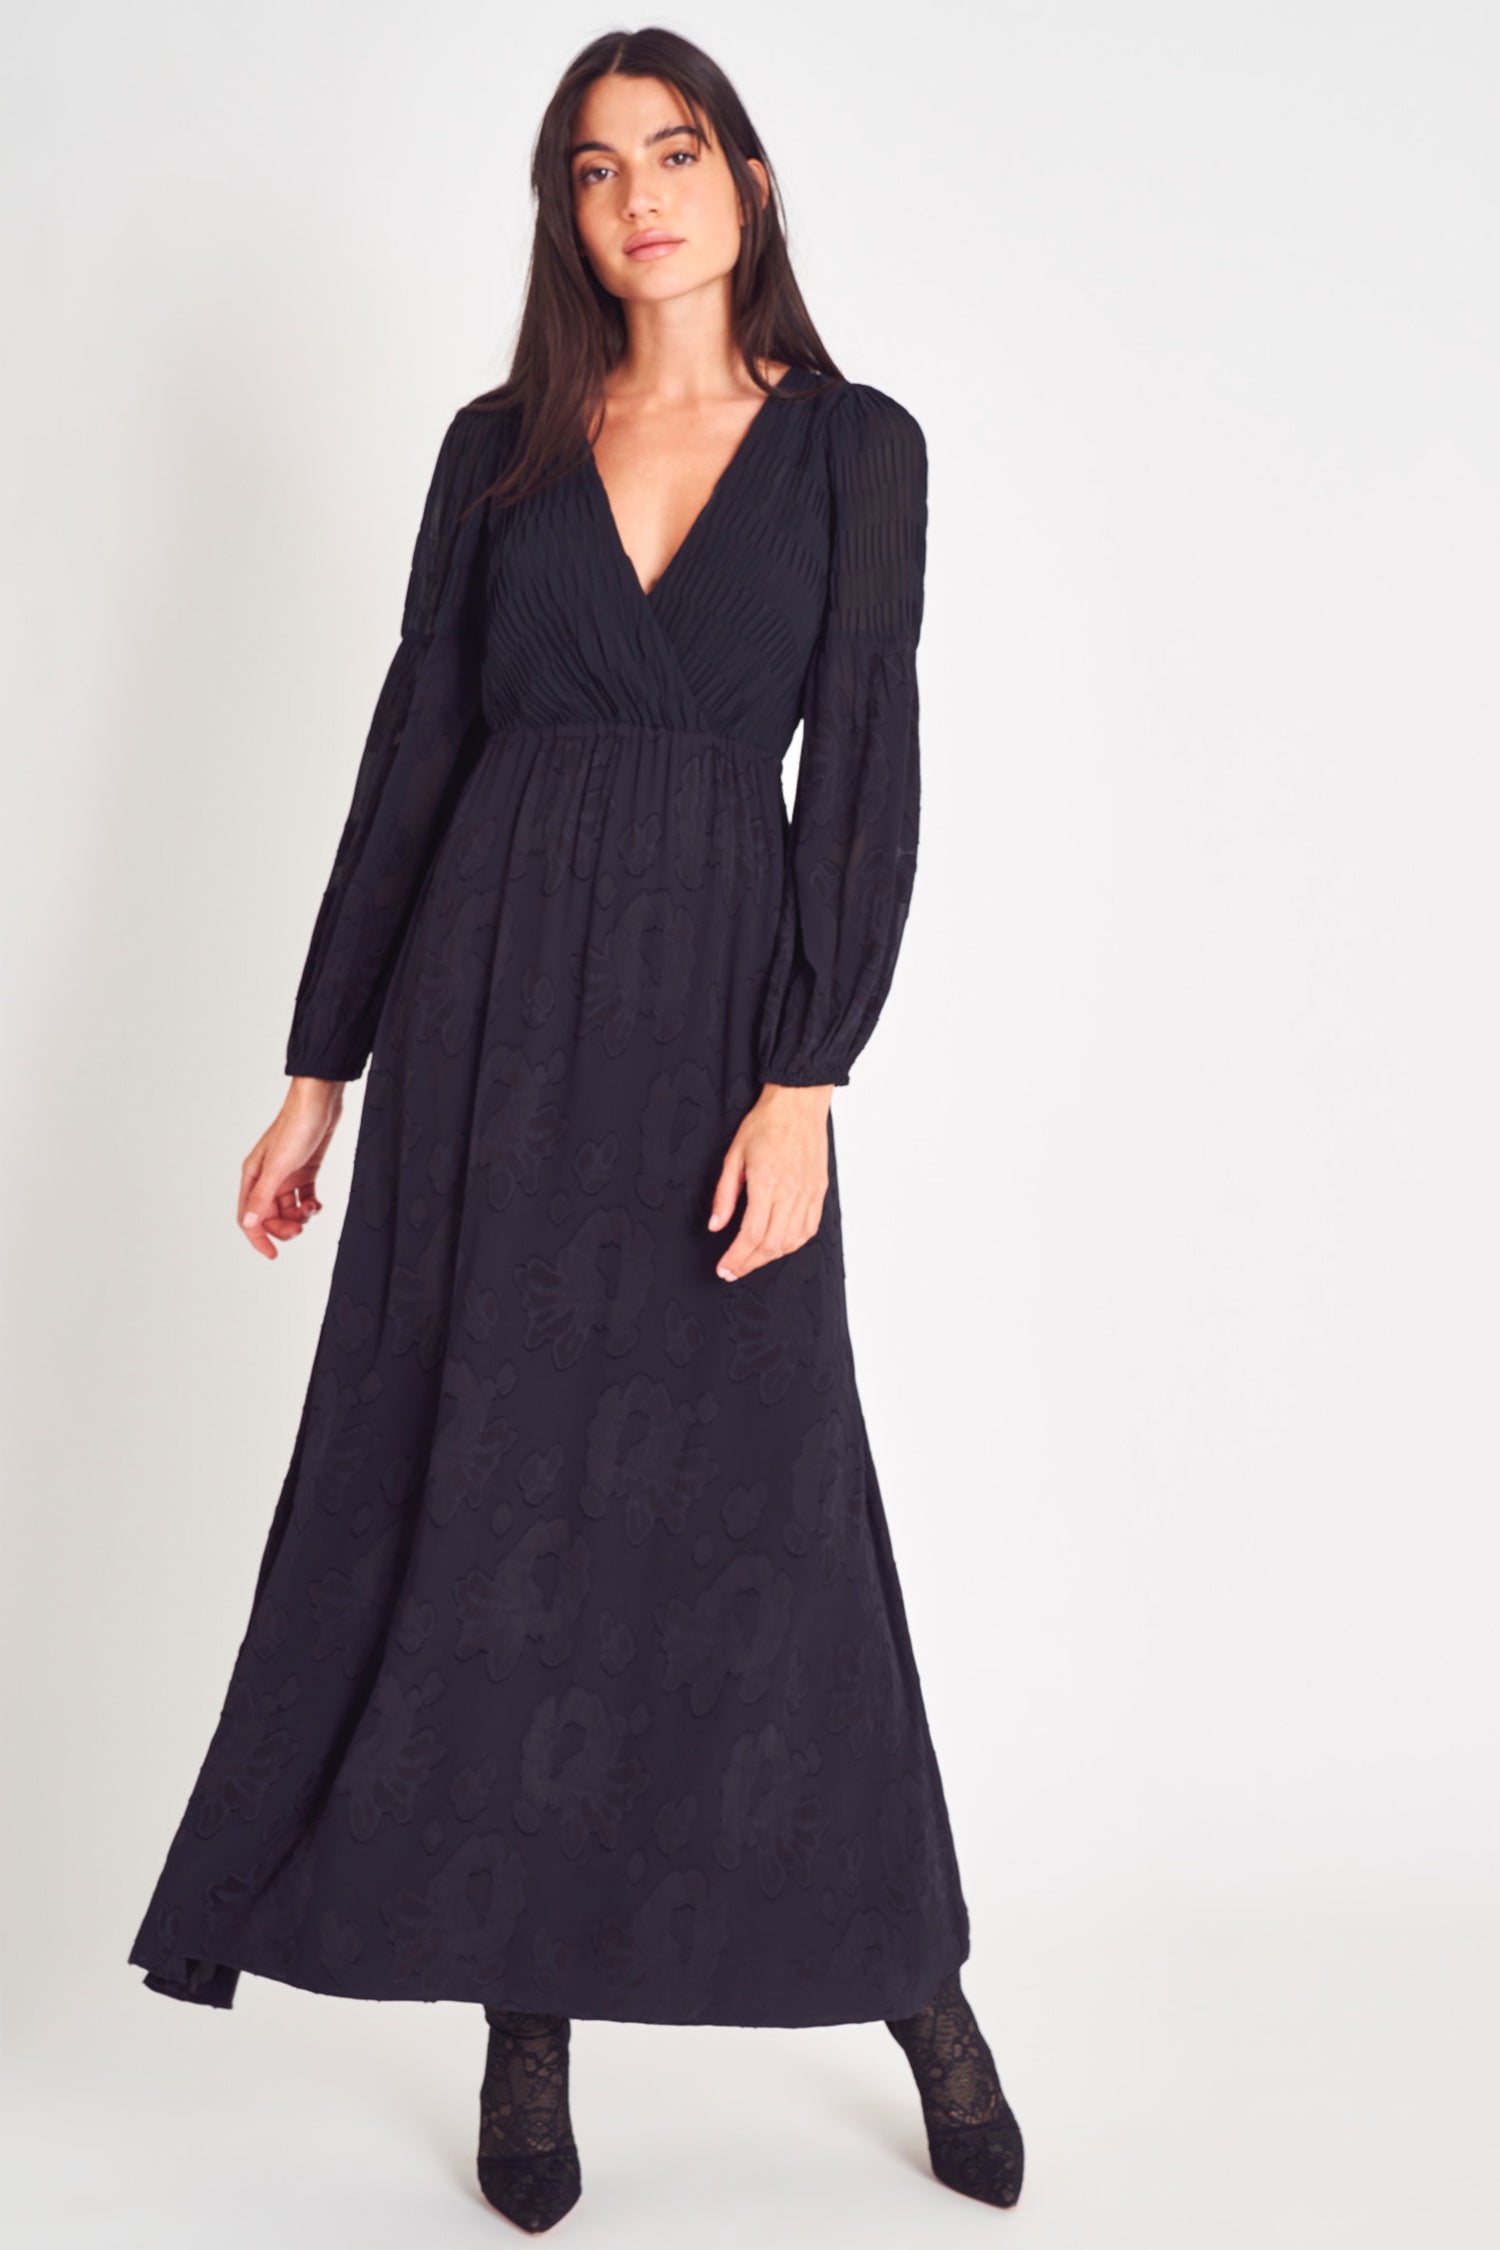 Black v neck long sleeve maxi dress with floral jacquard and pleated texture fabric.